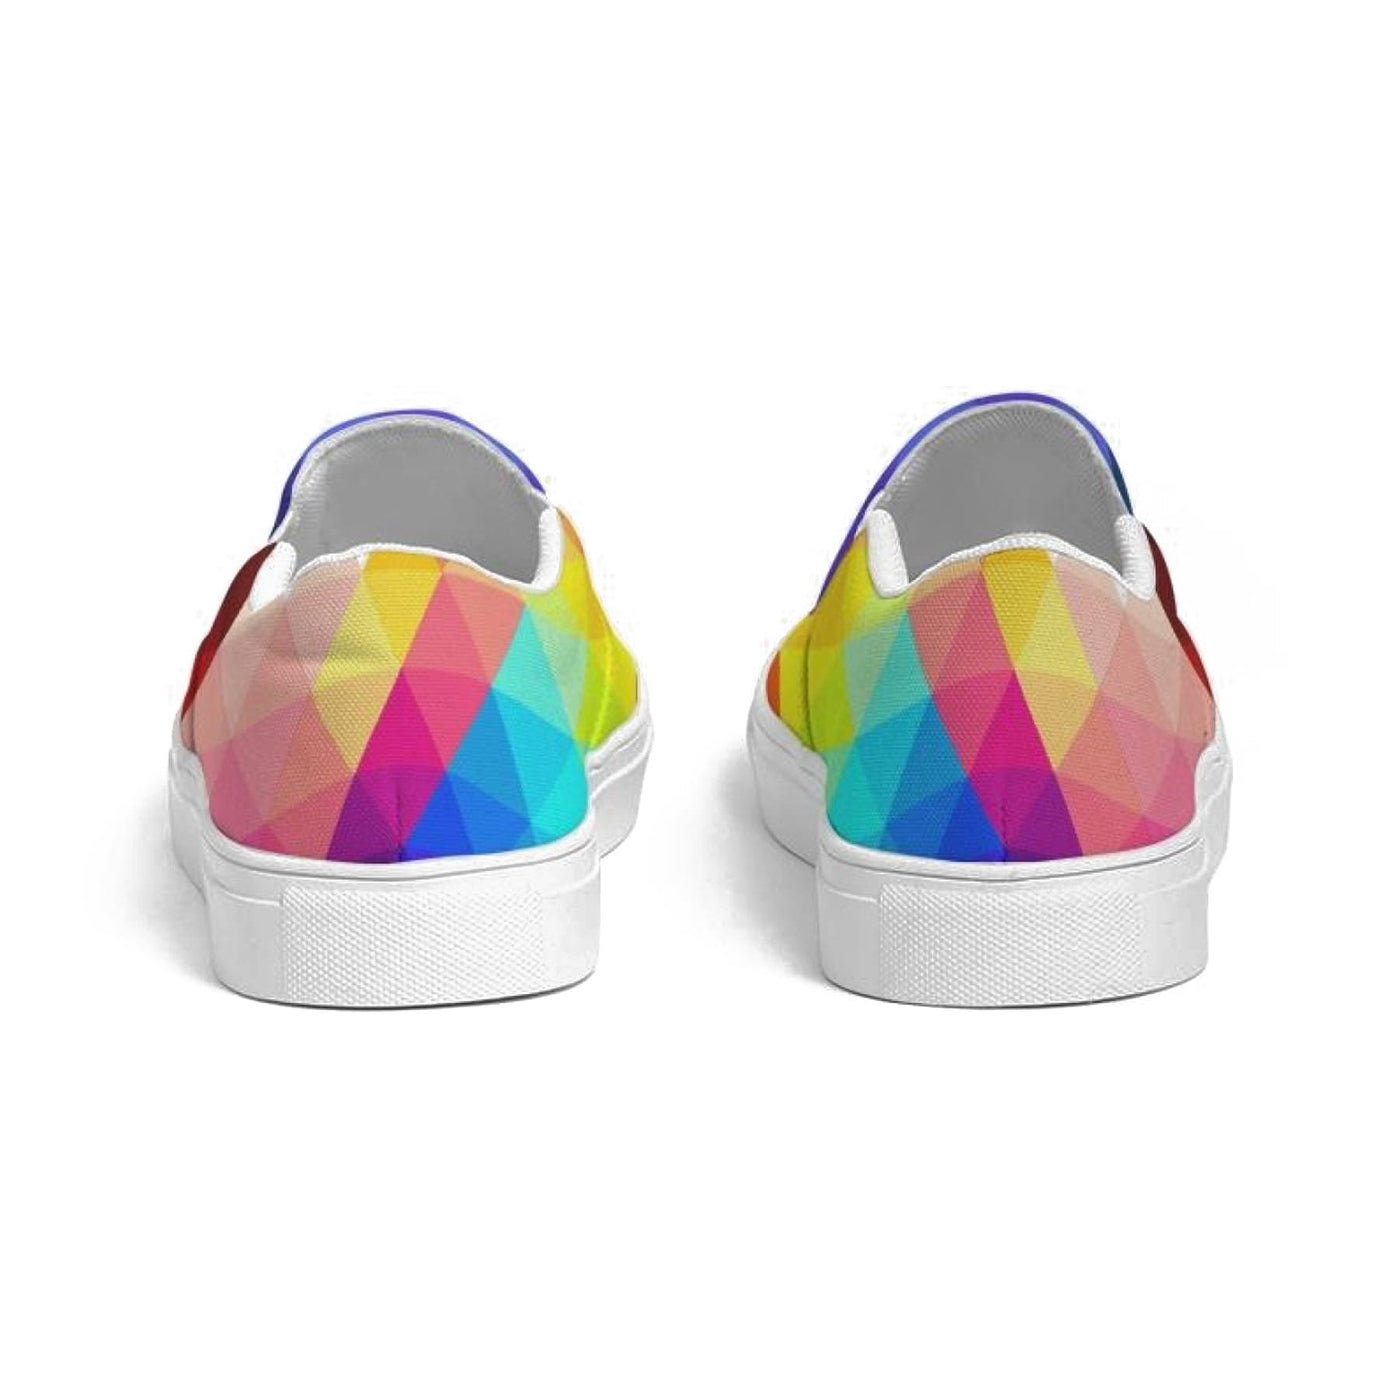 Womens Sneakers - Canvas Slip On Shoes Multicolor Retro Print - Womens